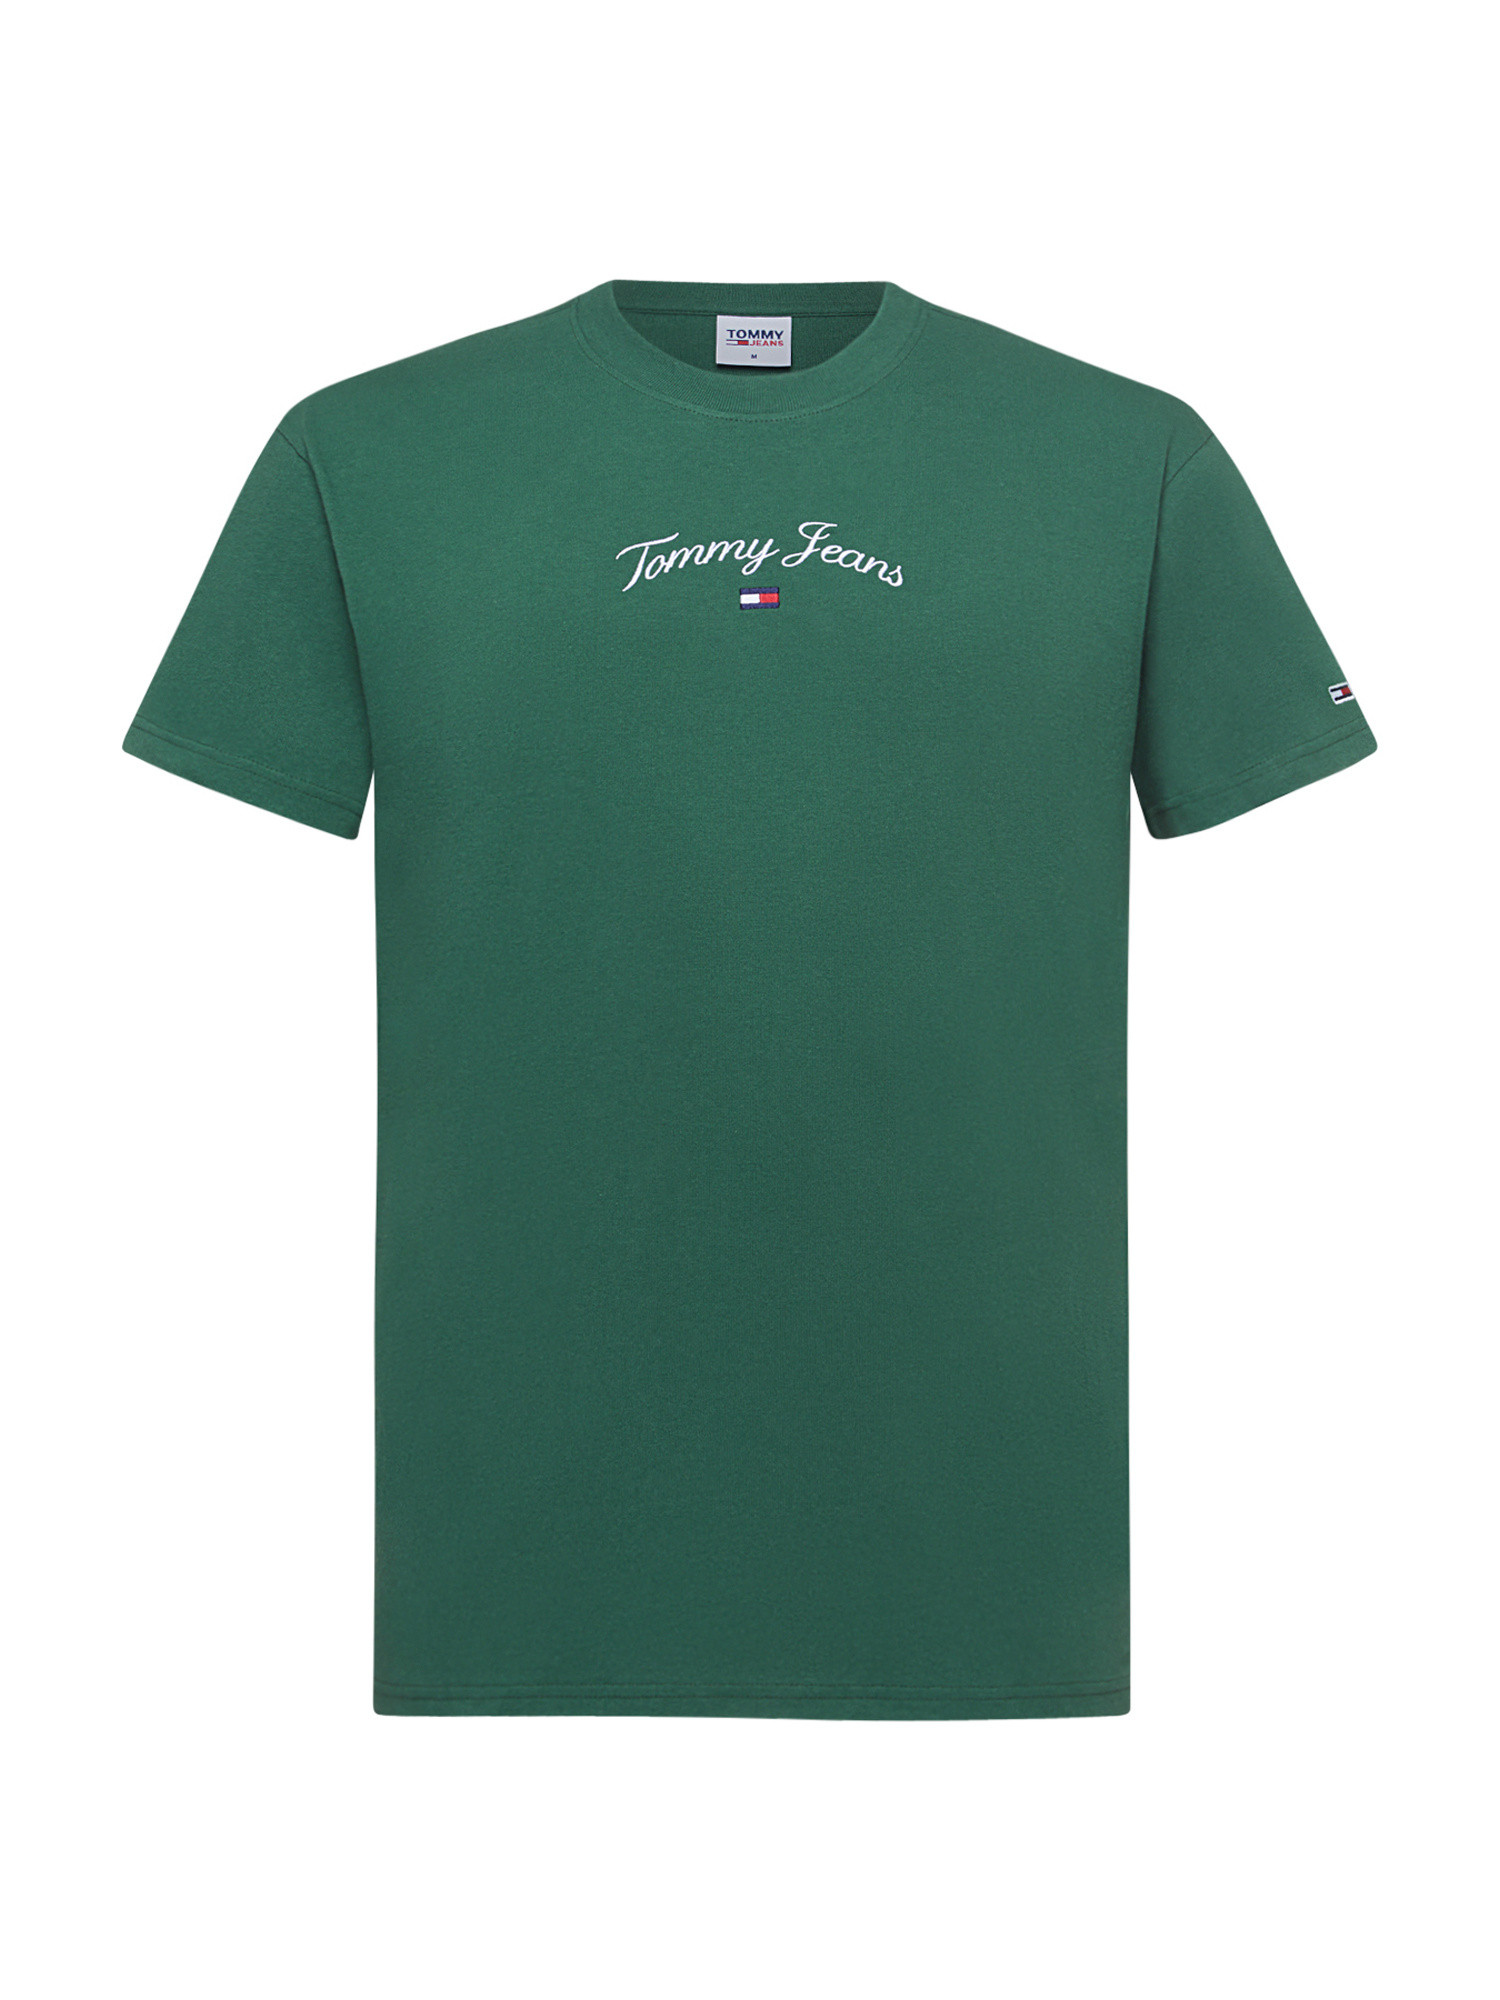 Tommy Jeans -Relaxed fit cotton T-shirt with logo, Dark Green, large image number 0